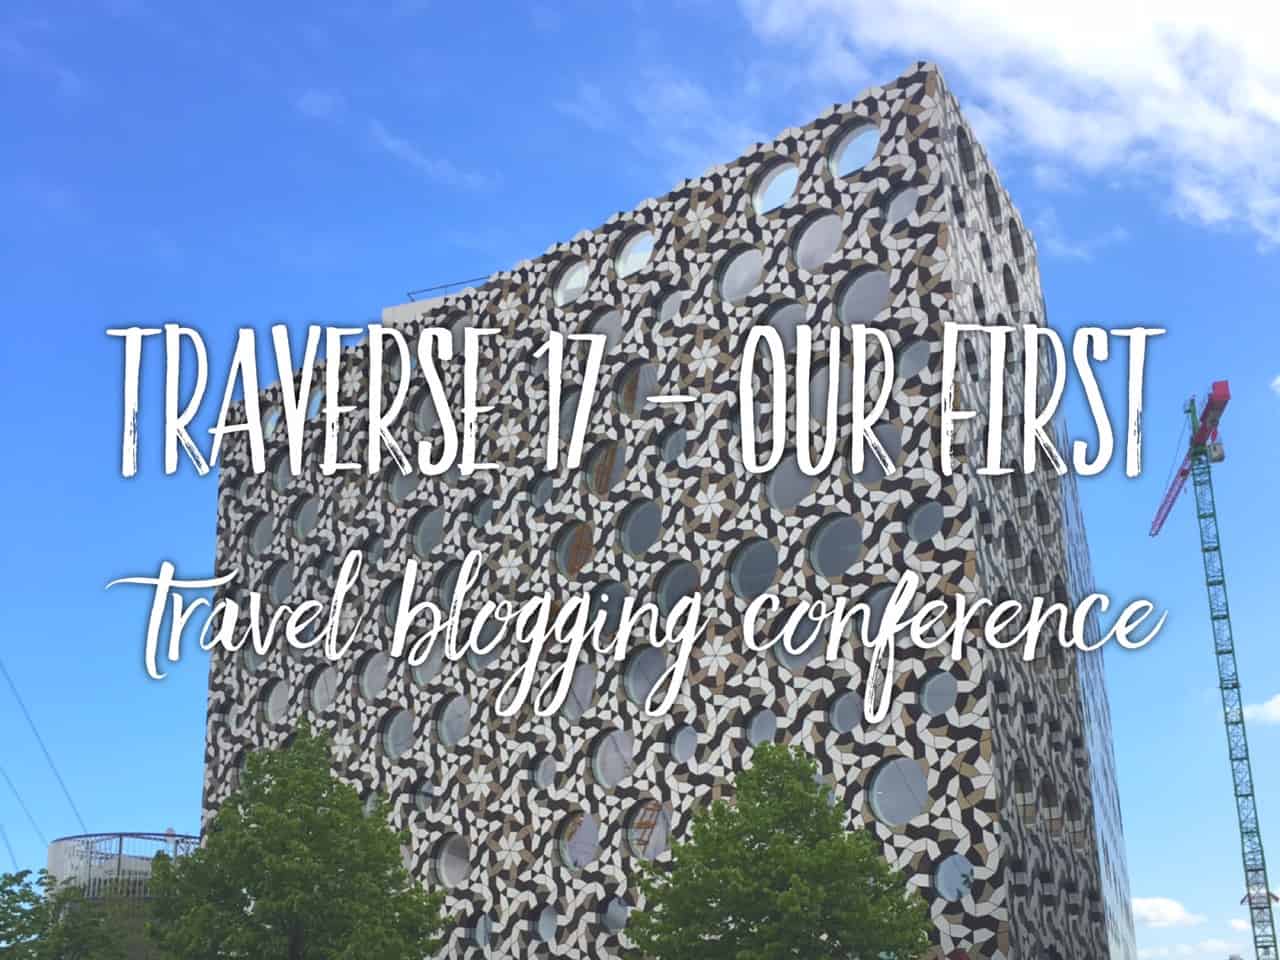 Traverse 2017 Recap - attending our first travel blogger conference